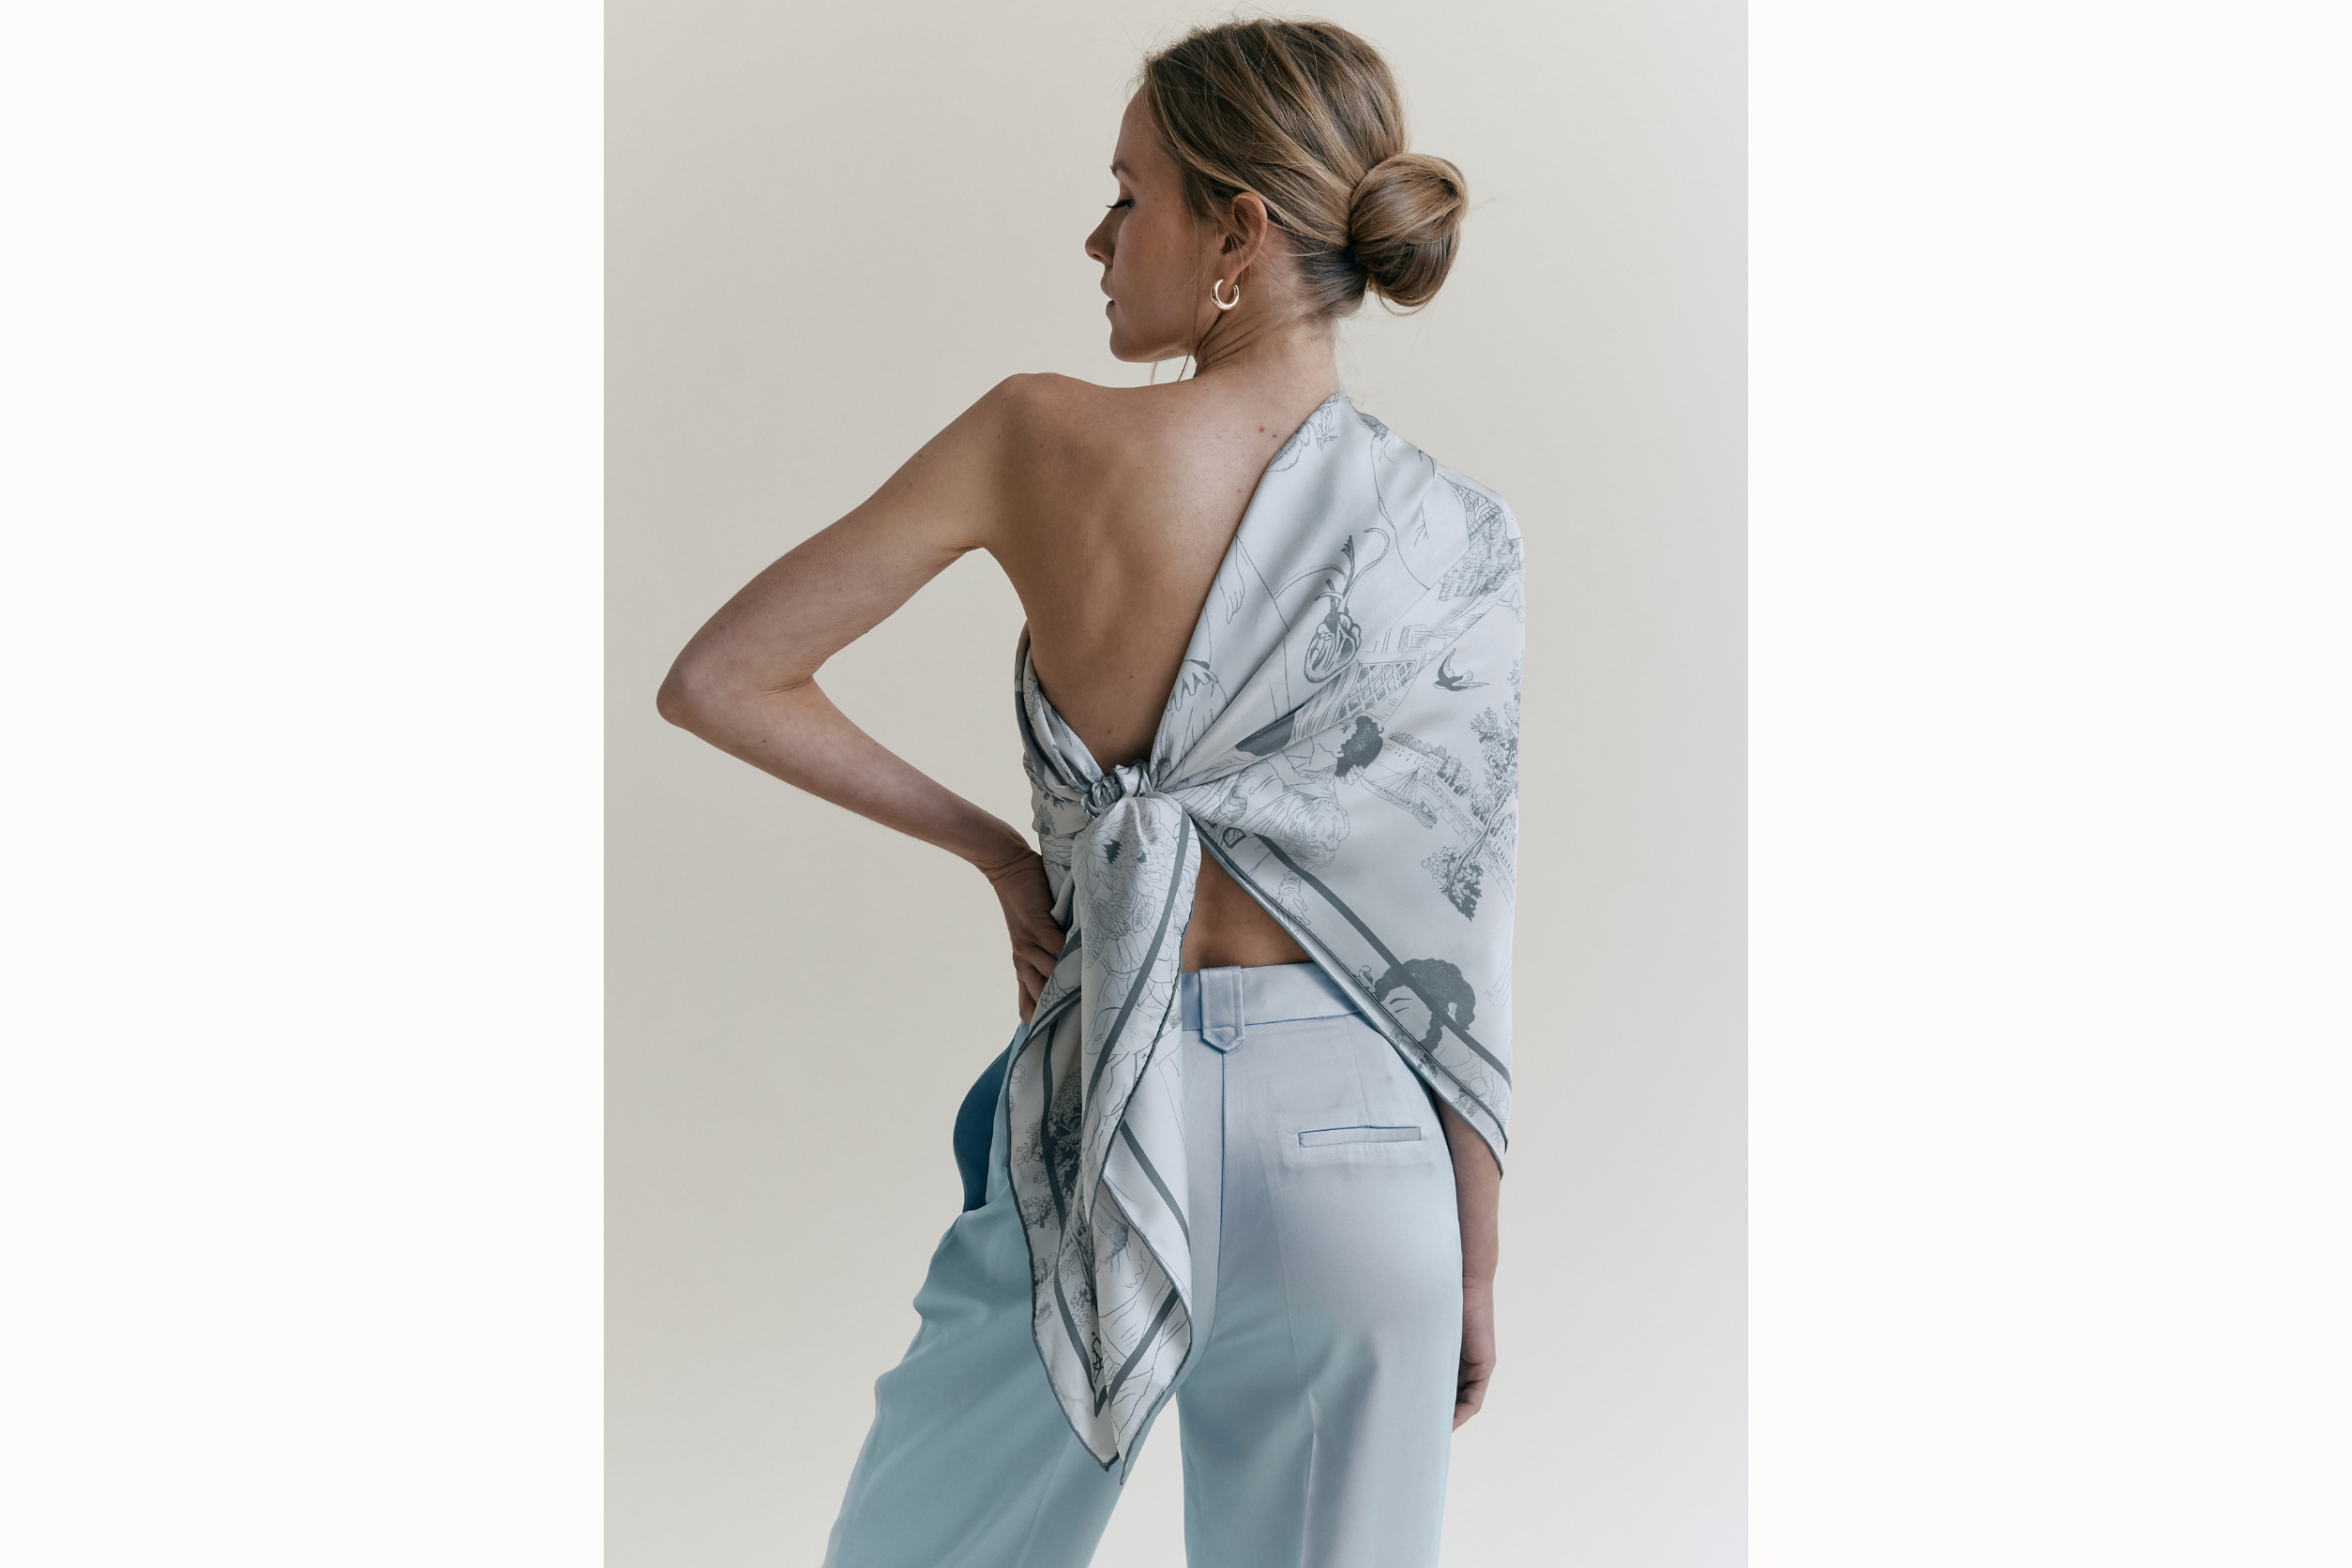 Female model faces her back to the camera wearing the pewter scarf styled as a one-shoulder top, tied on the back left side. She wears gold hoops and light blue pants. Her hair is styled up in a bun to highlight details of the scarf. 